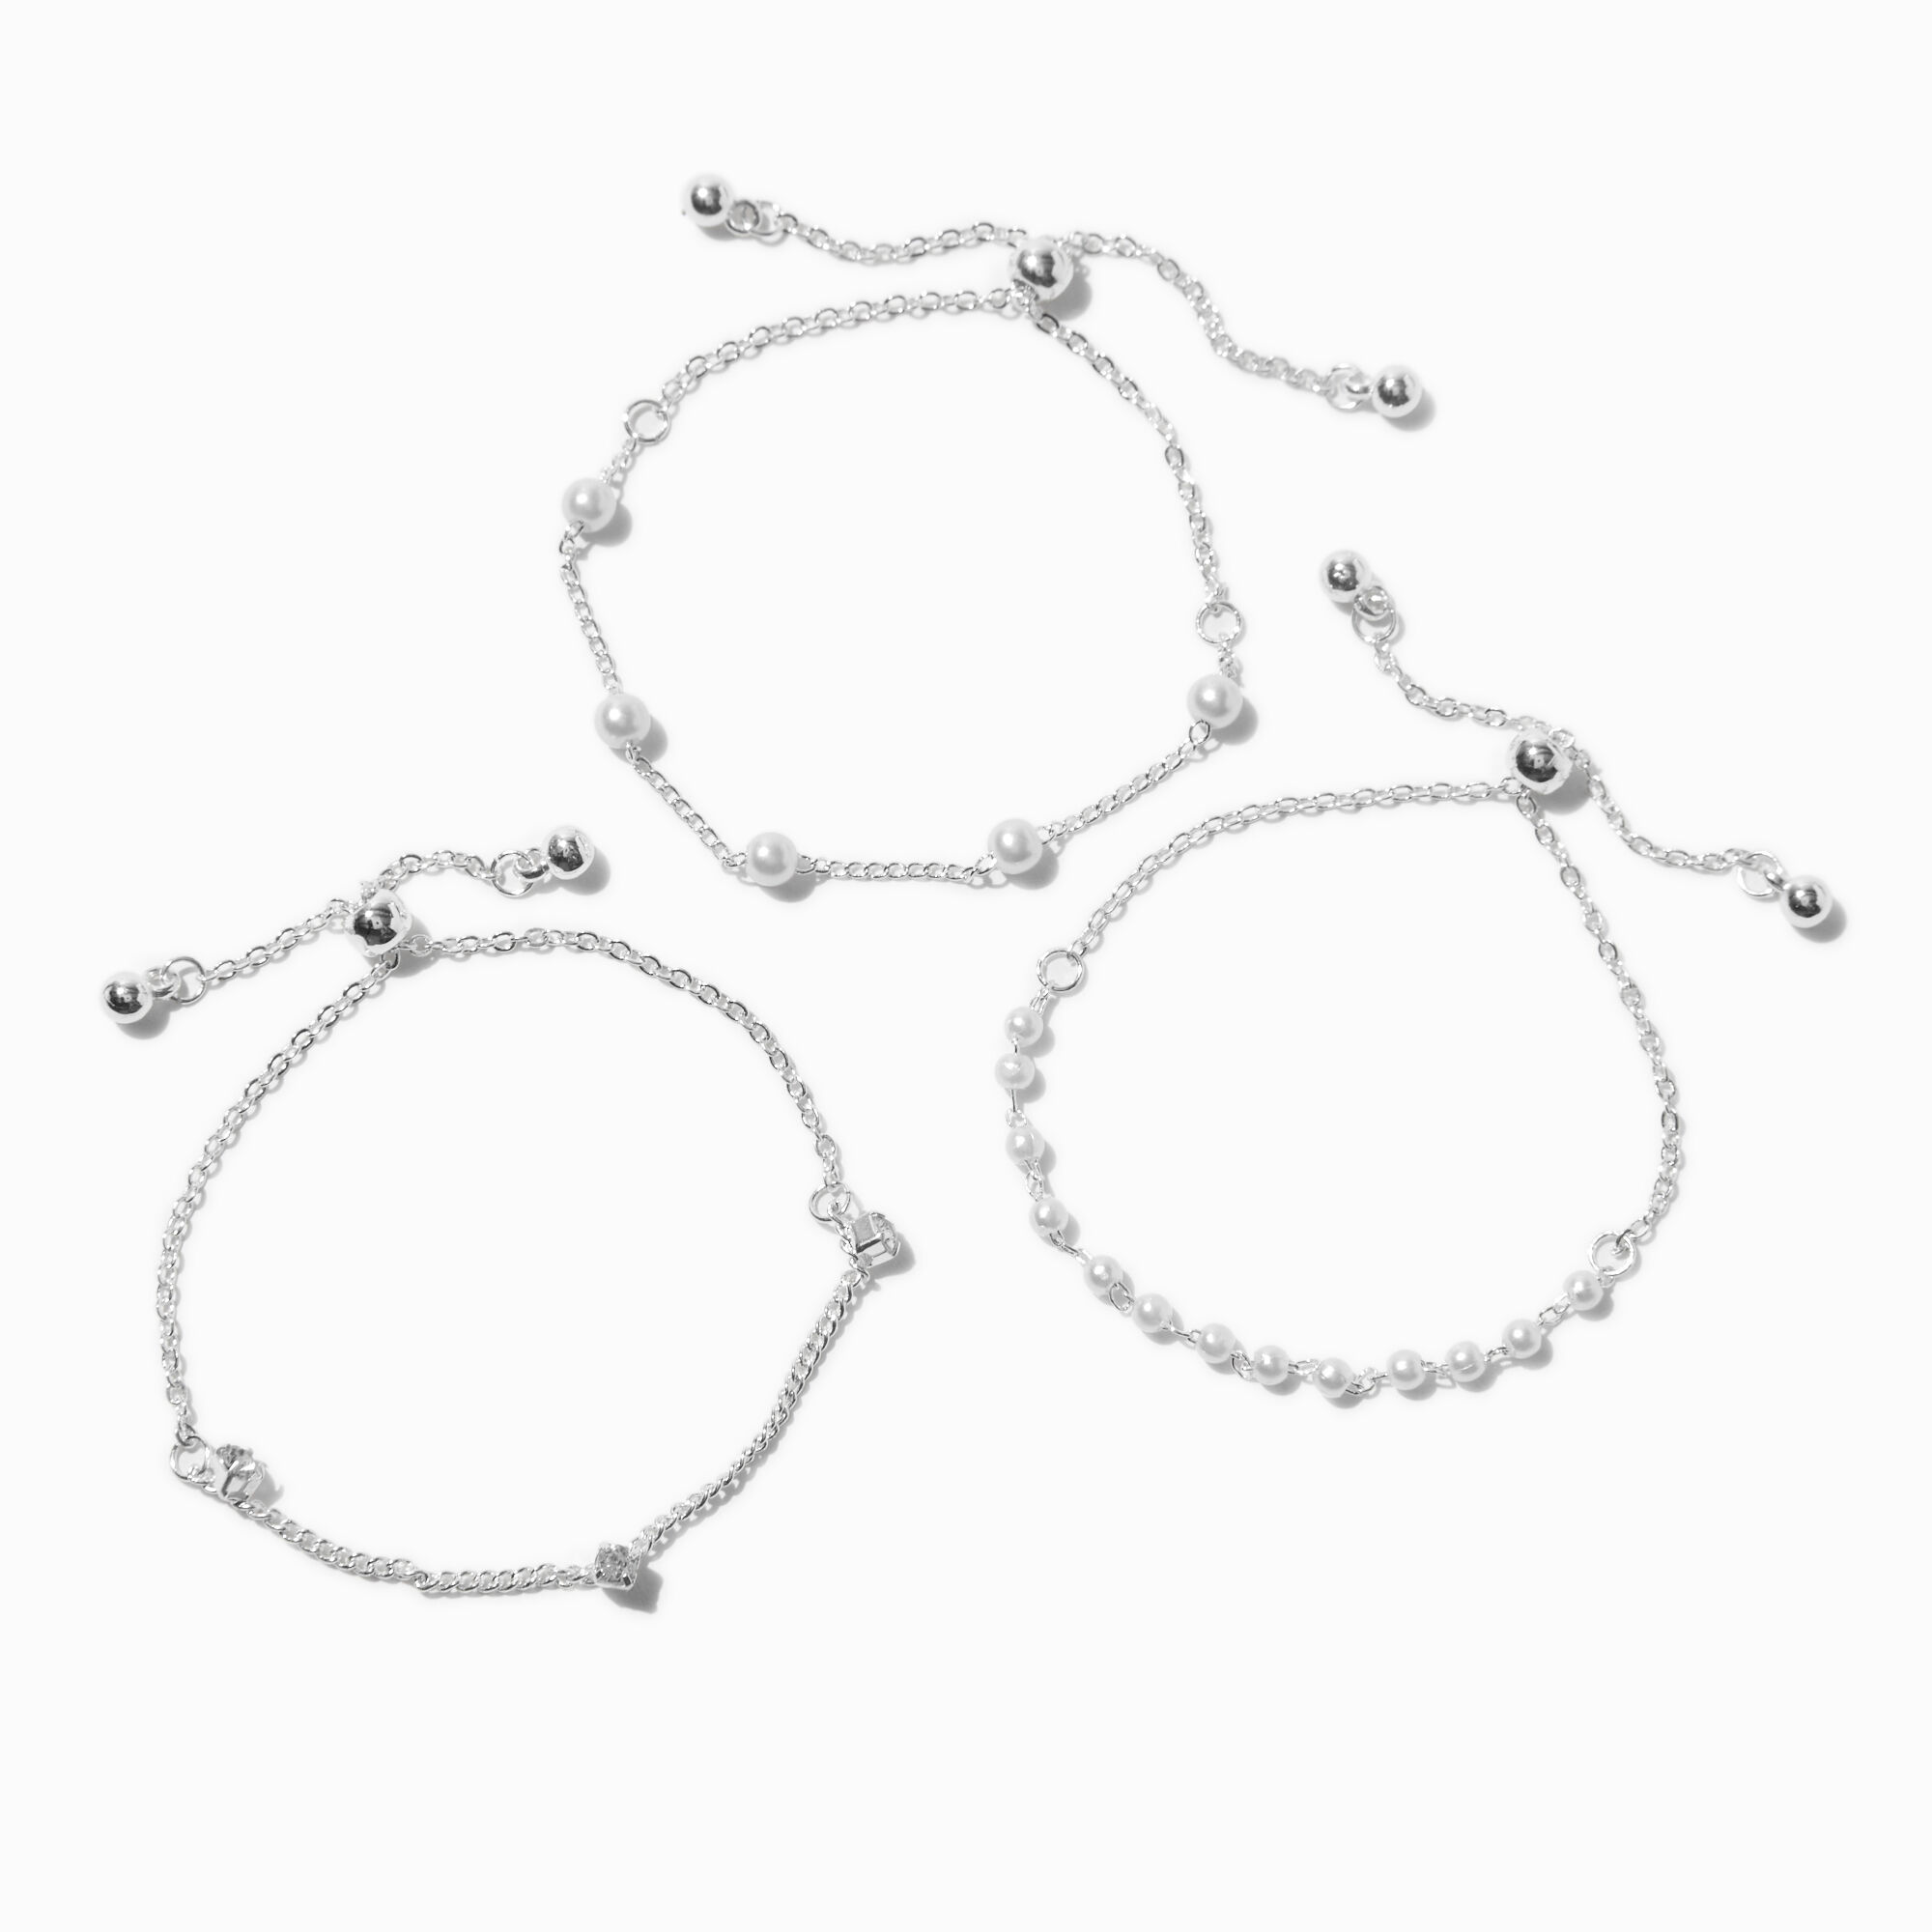 View Claires Club Special Occasion Tone Pearl Bolo Bracelets 3 Pack Silver information